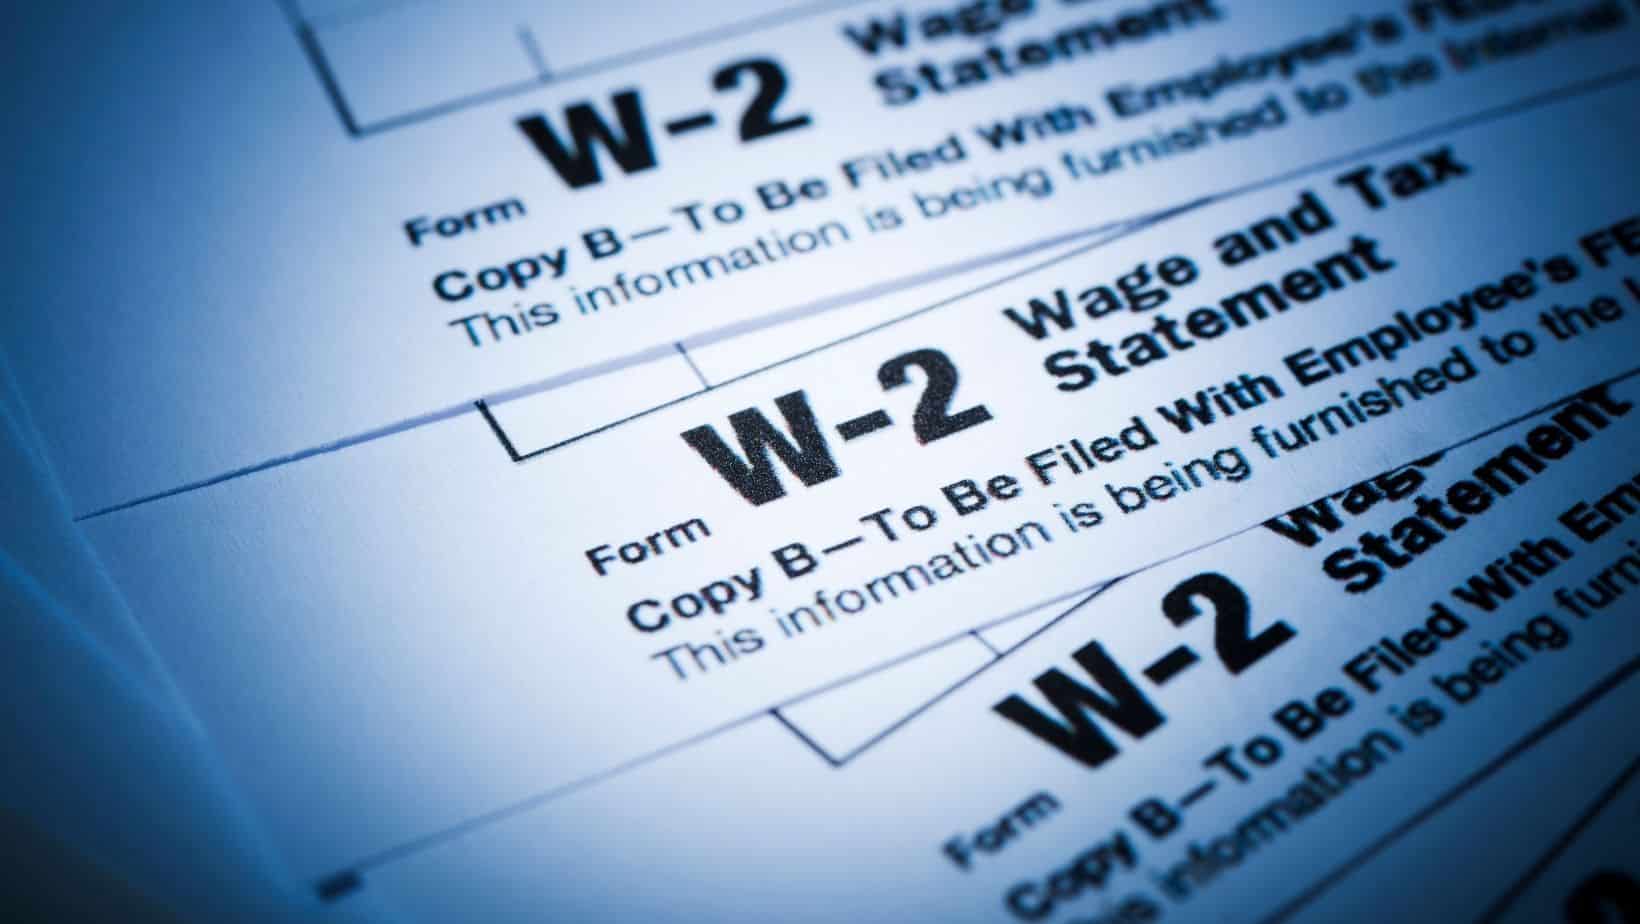 How to access W-2 electronically